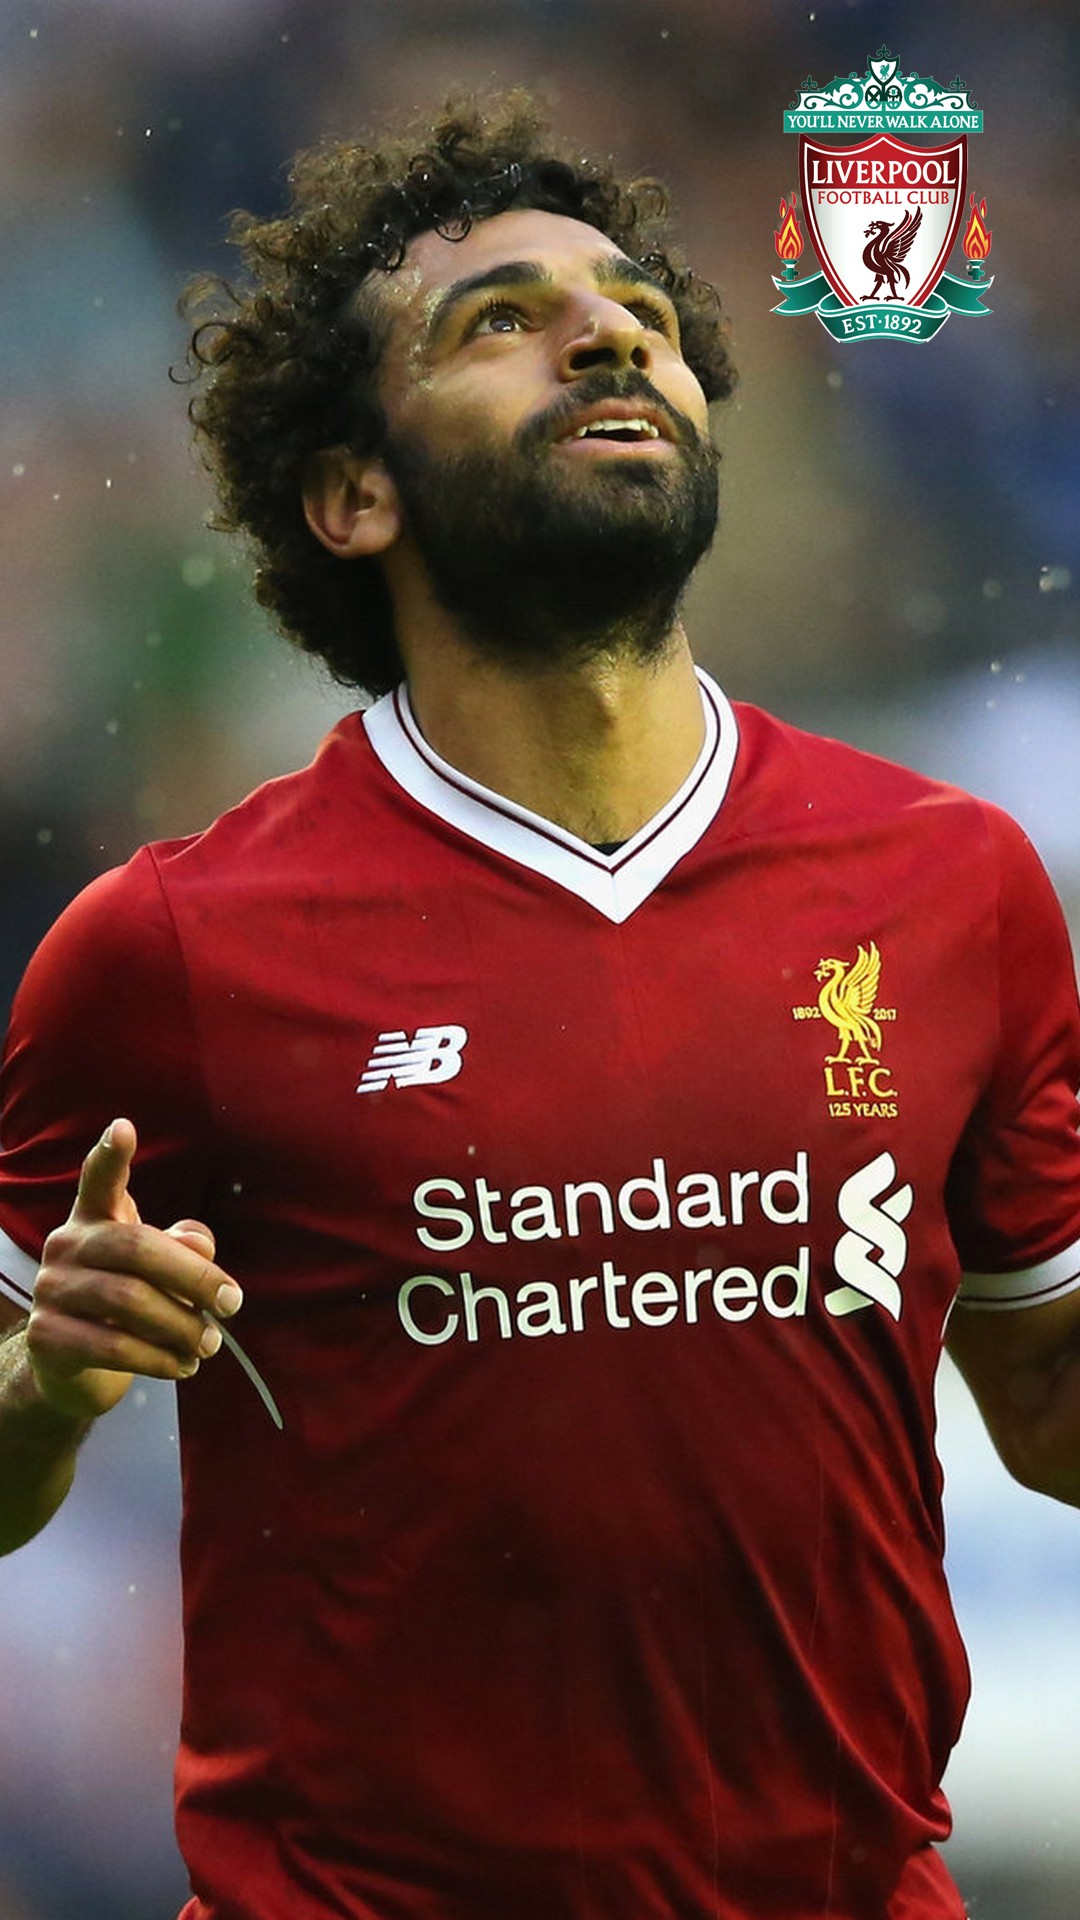 Android Wallpaper HD Mohamed Salah with resolution 1080X1920 pixel. You can make this wallpaper for your Android backgrounds, Tablet, Smartphones Screensavers and Mobile Phone Lock Screen